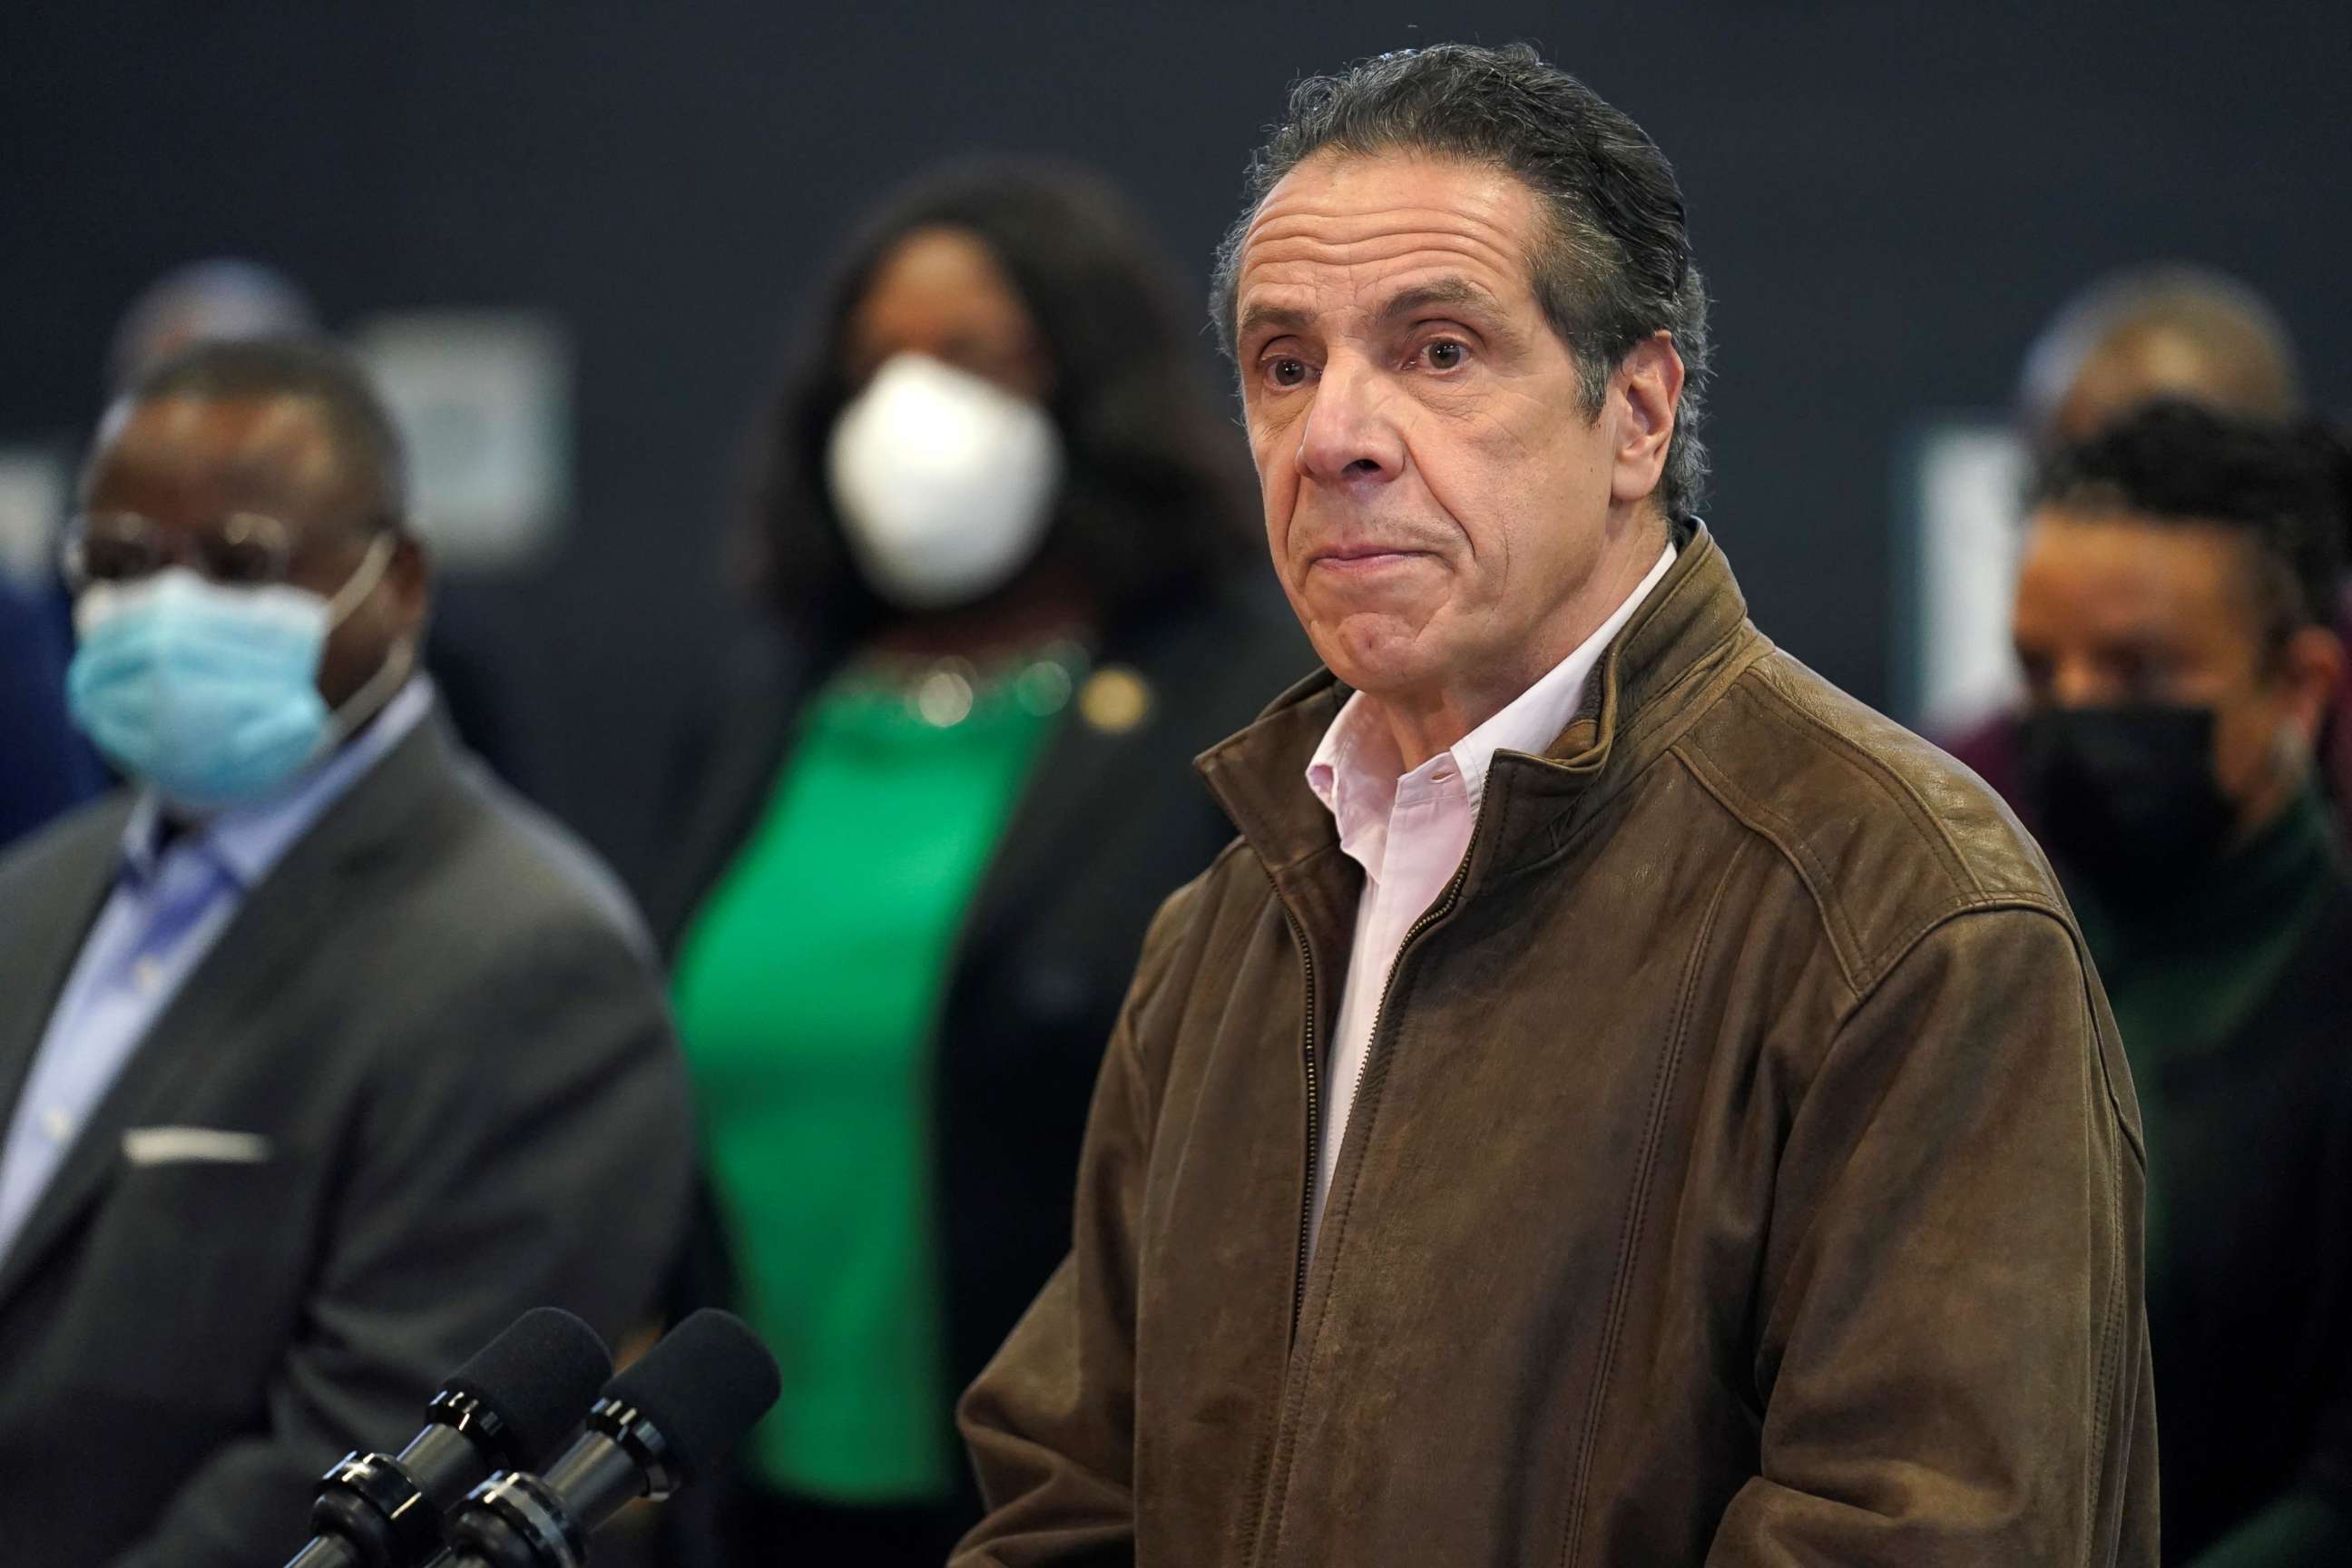 PHOTO: New York Governor Andrew Cuomo speaks during a news conference at a vaccination site in the Brooklyn borough of New York, Feb. 22, 2021.